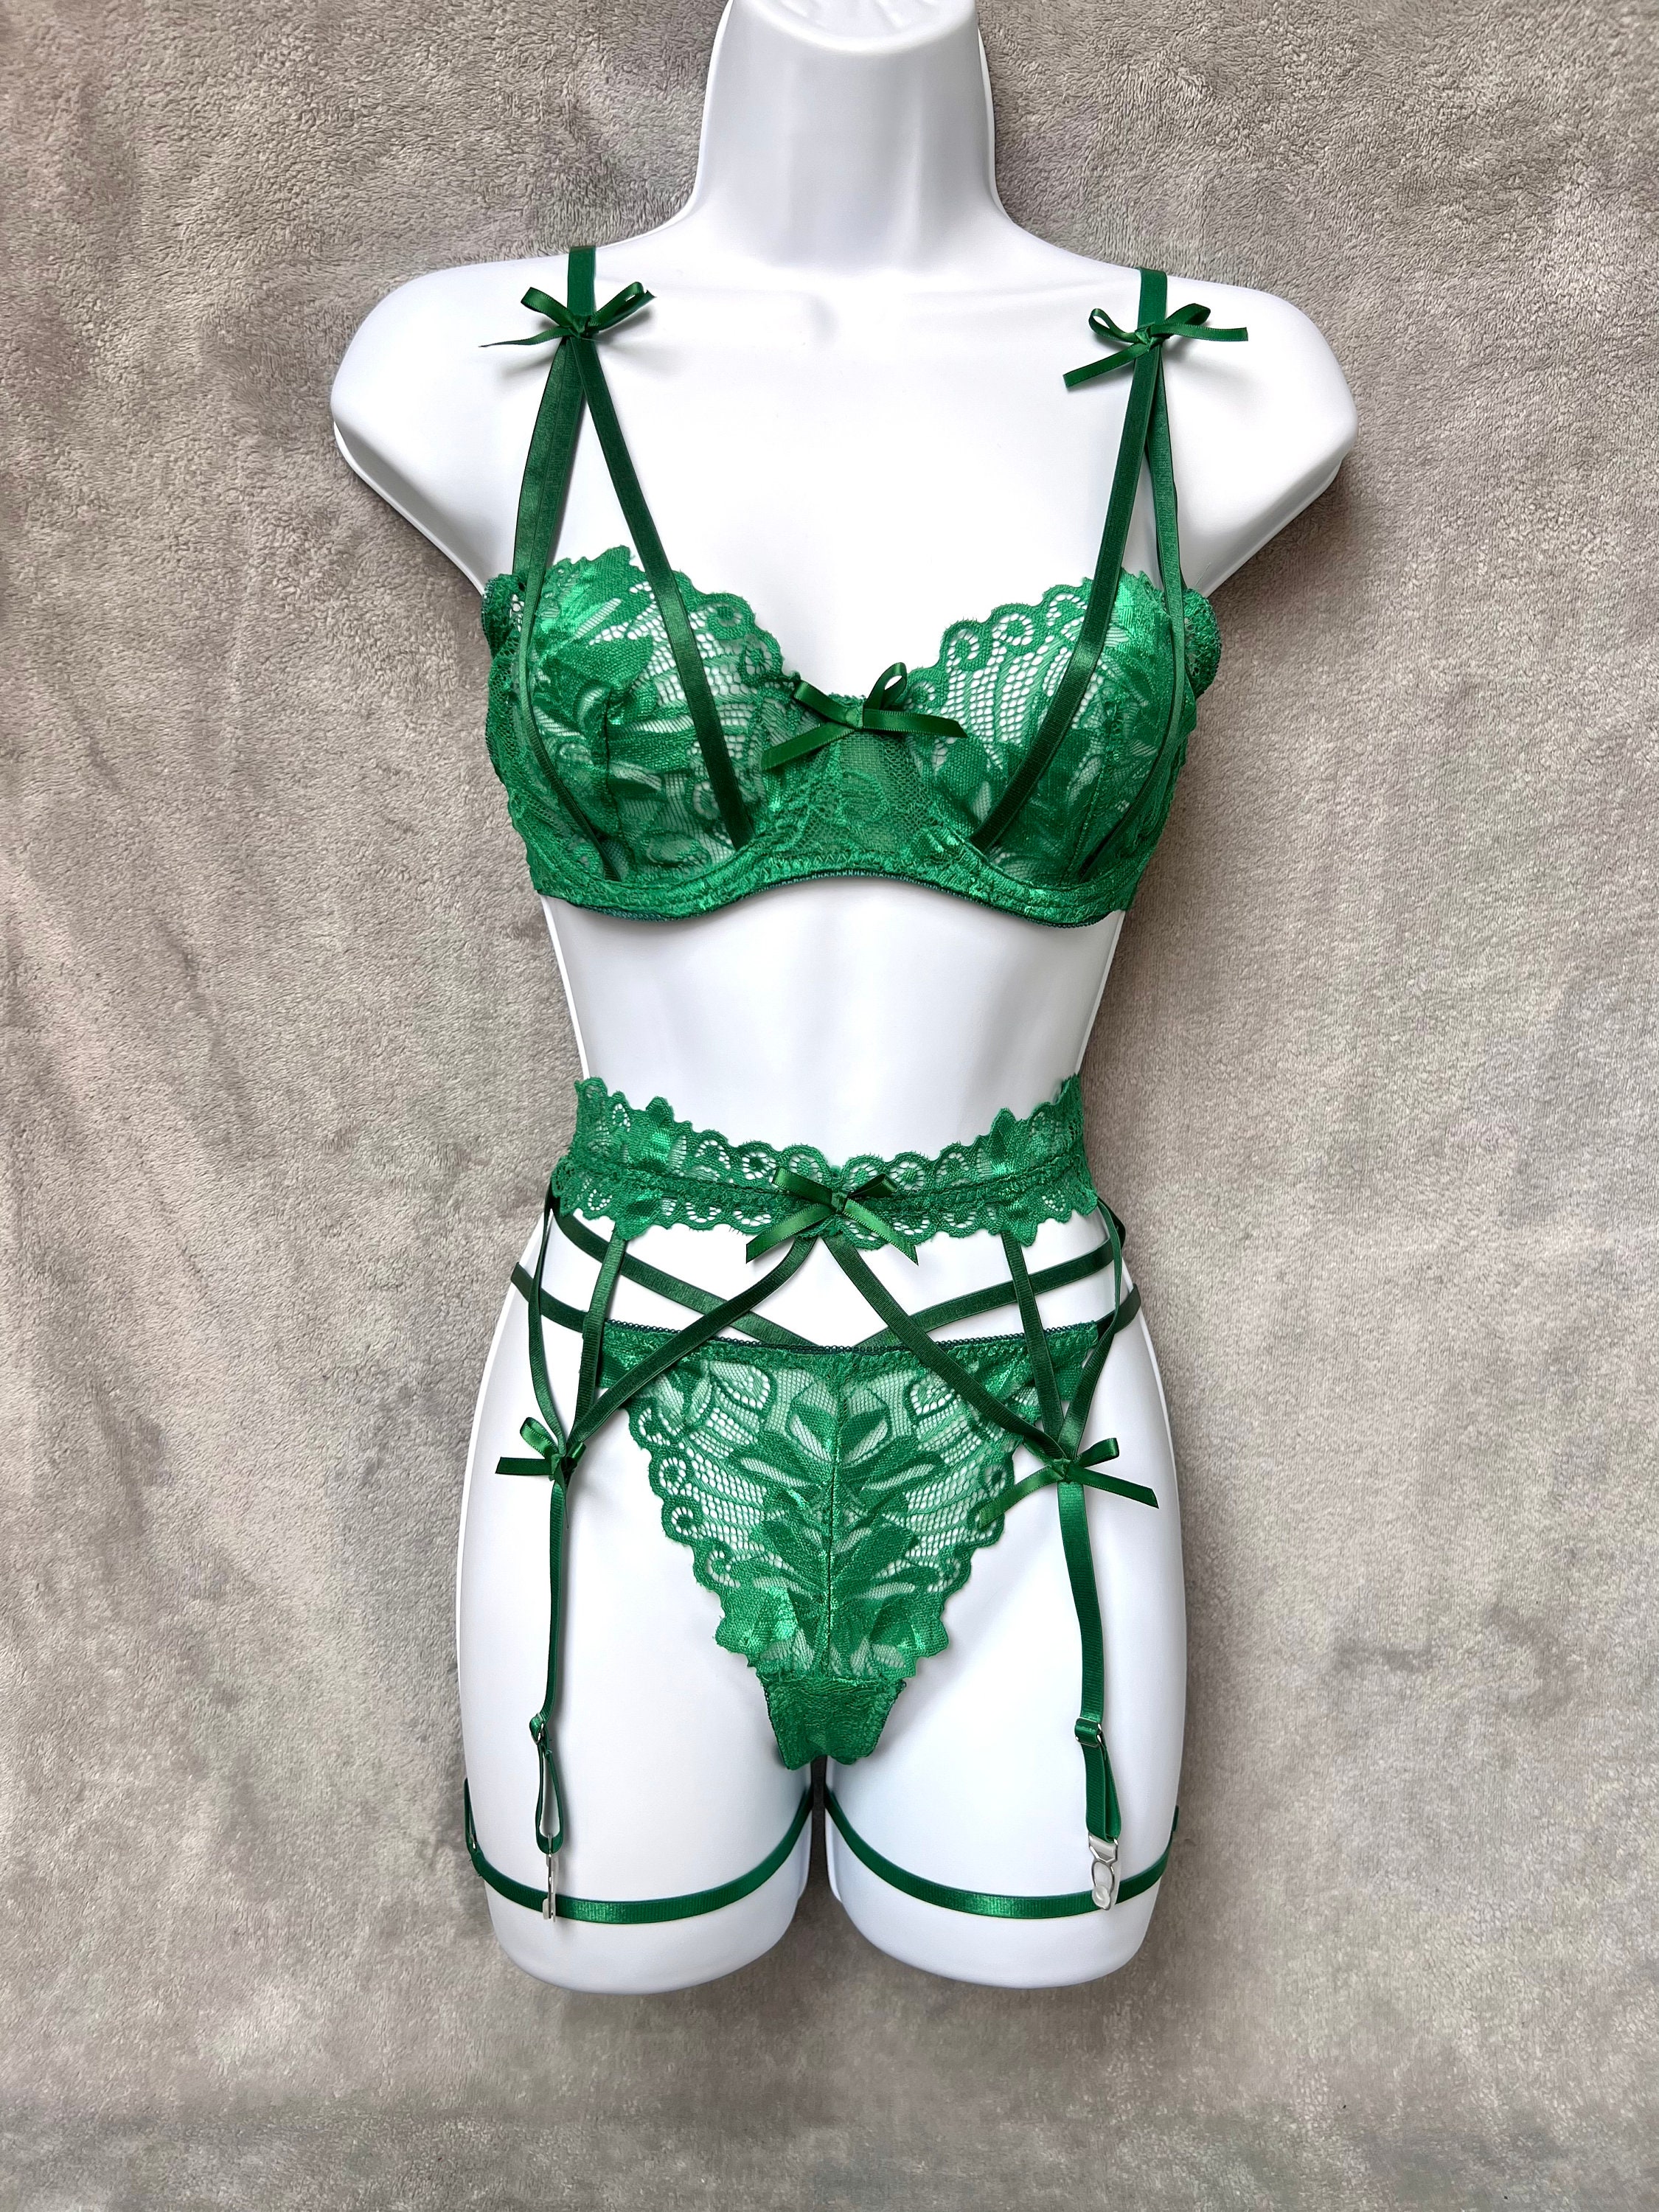 Hunter green Stretch Lace for Lingerie dark green lace trim Lingerie Lace  by the yard